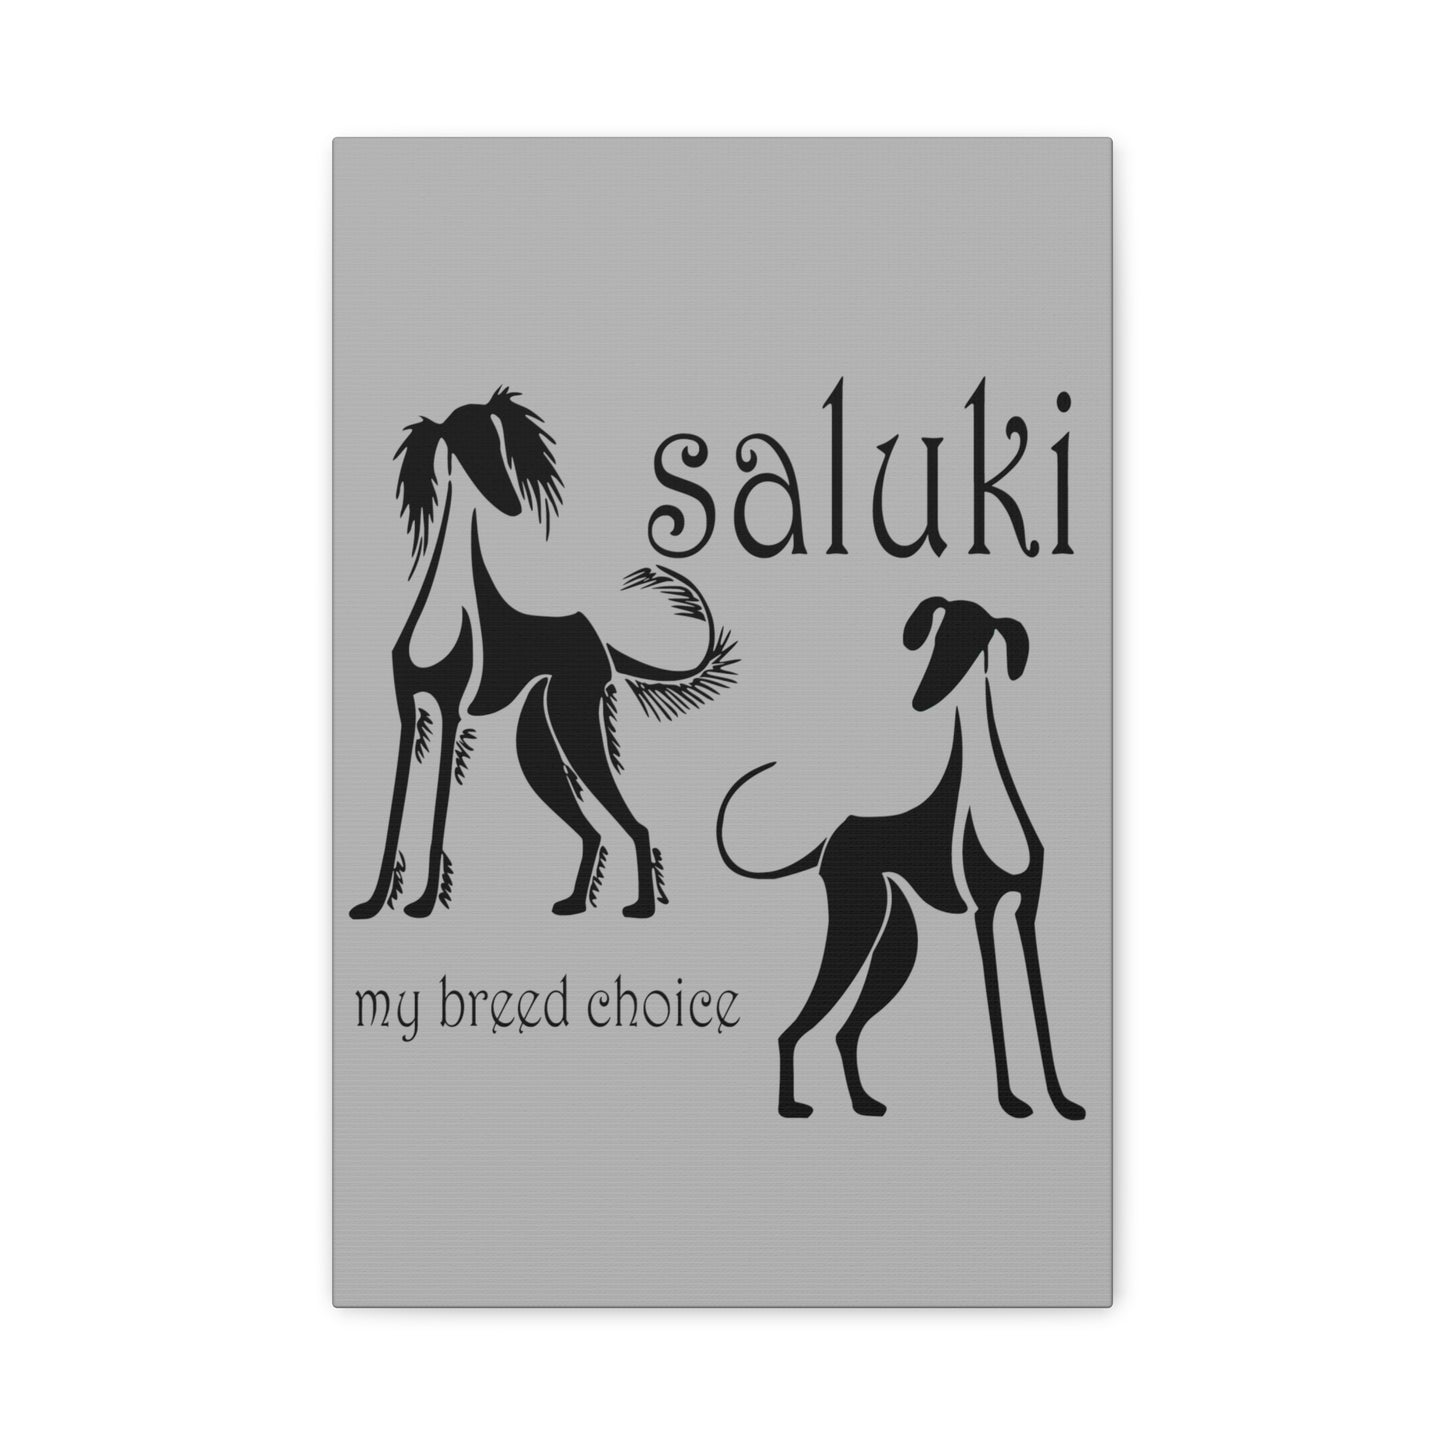 SALUKI ART IN A BOLD ART STYLE on a Matte Canvas, Stretched, 1.25"